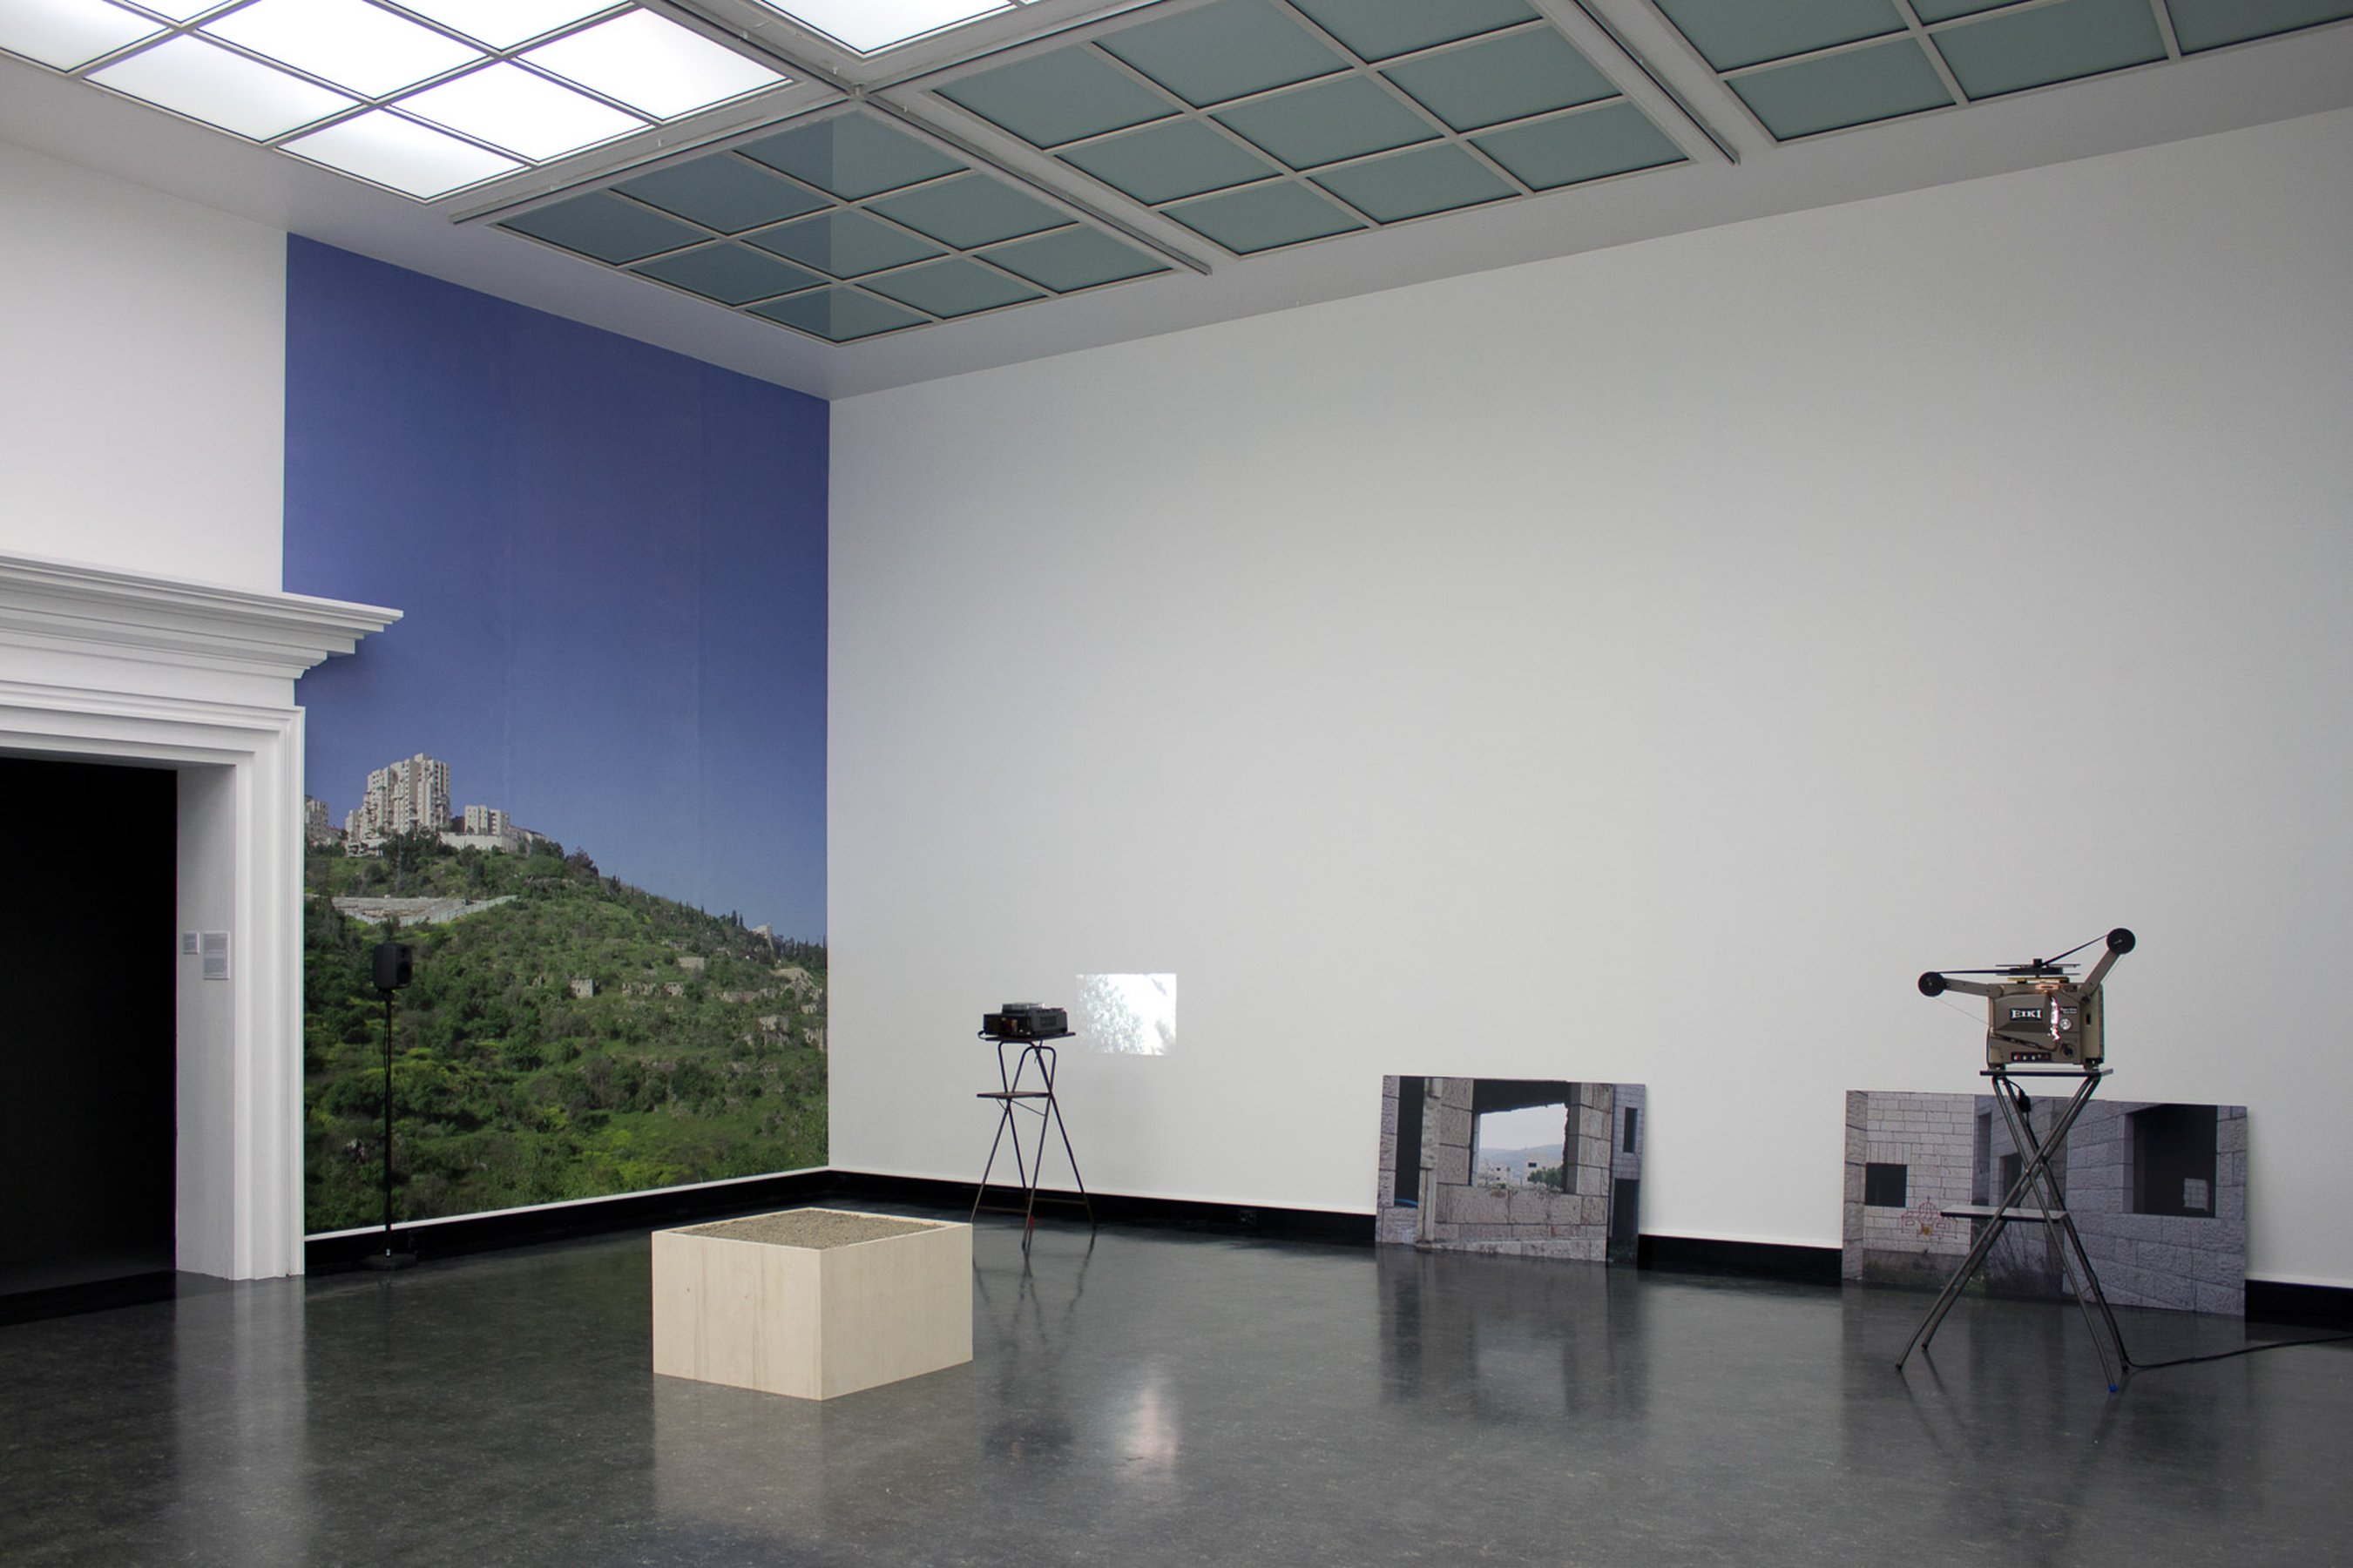 Unmade Film - The Reconnaissance, 2012 - 2013 installation view